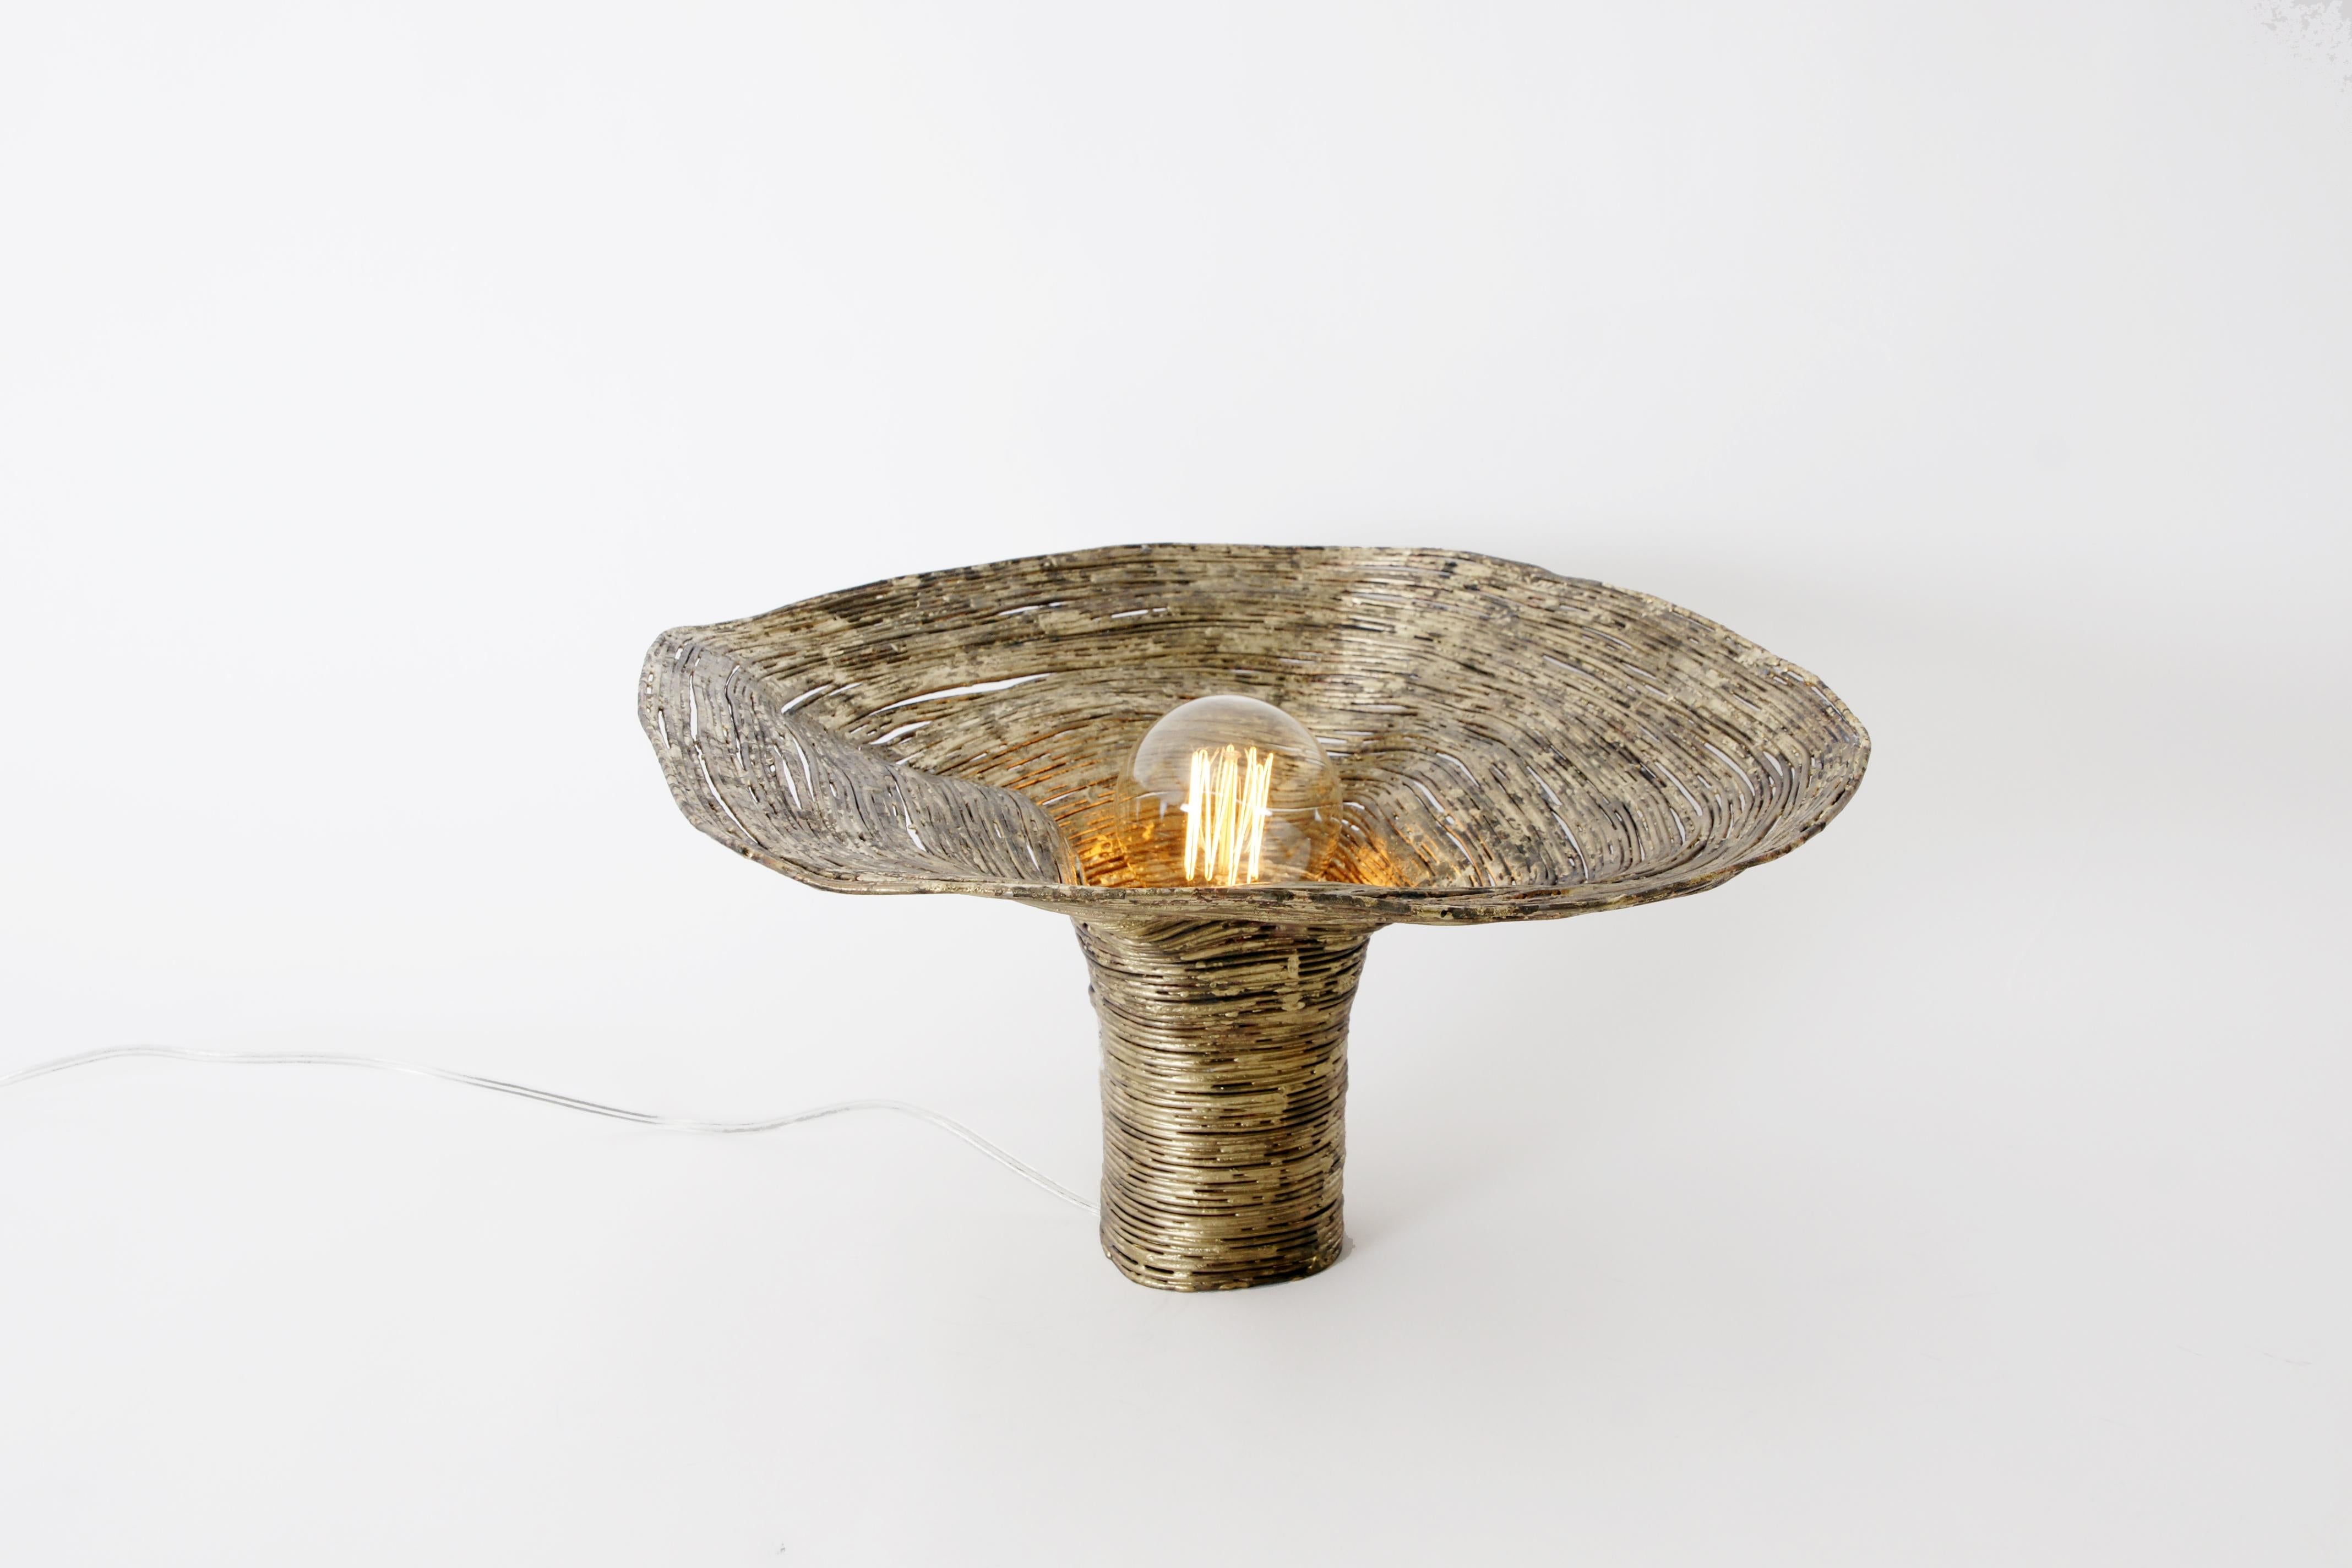 Wrap Spruce table light by Johannes Hemann
Materials: Steel wire, brass
Dimensions: height 27cm, Ø 42cm

‘wrap, the series of objects by German designer Johannes Hemann examines the shells of things remaining after their disappearance. For this